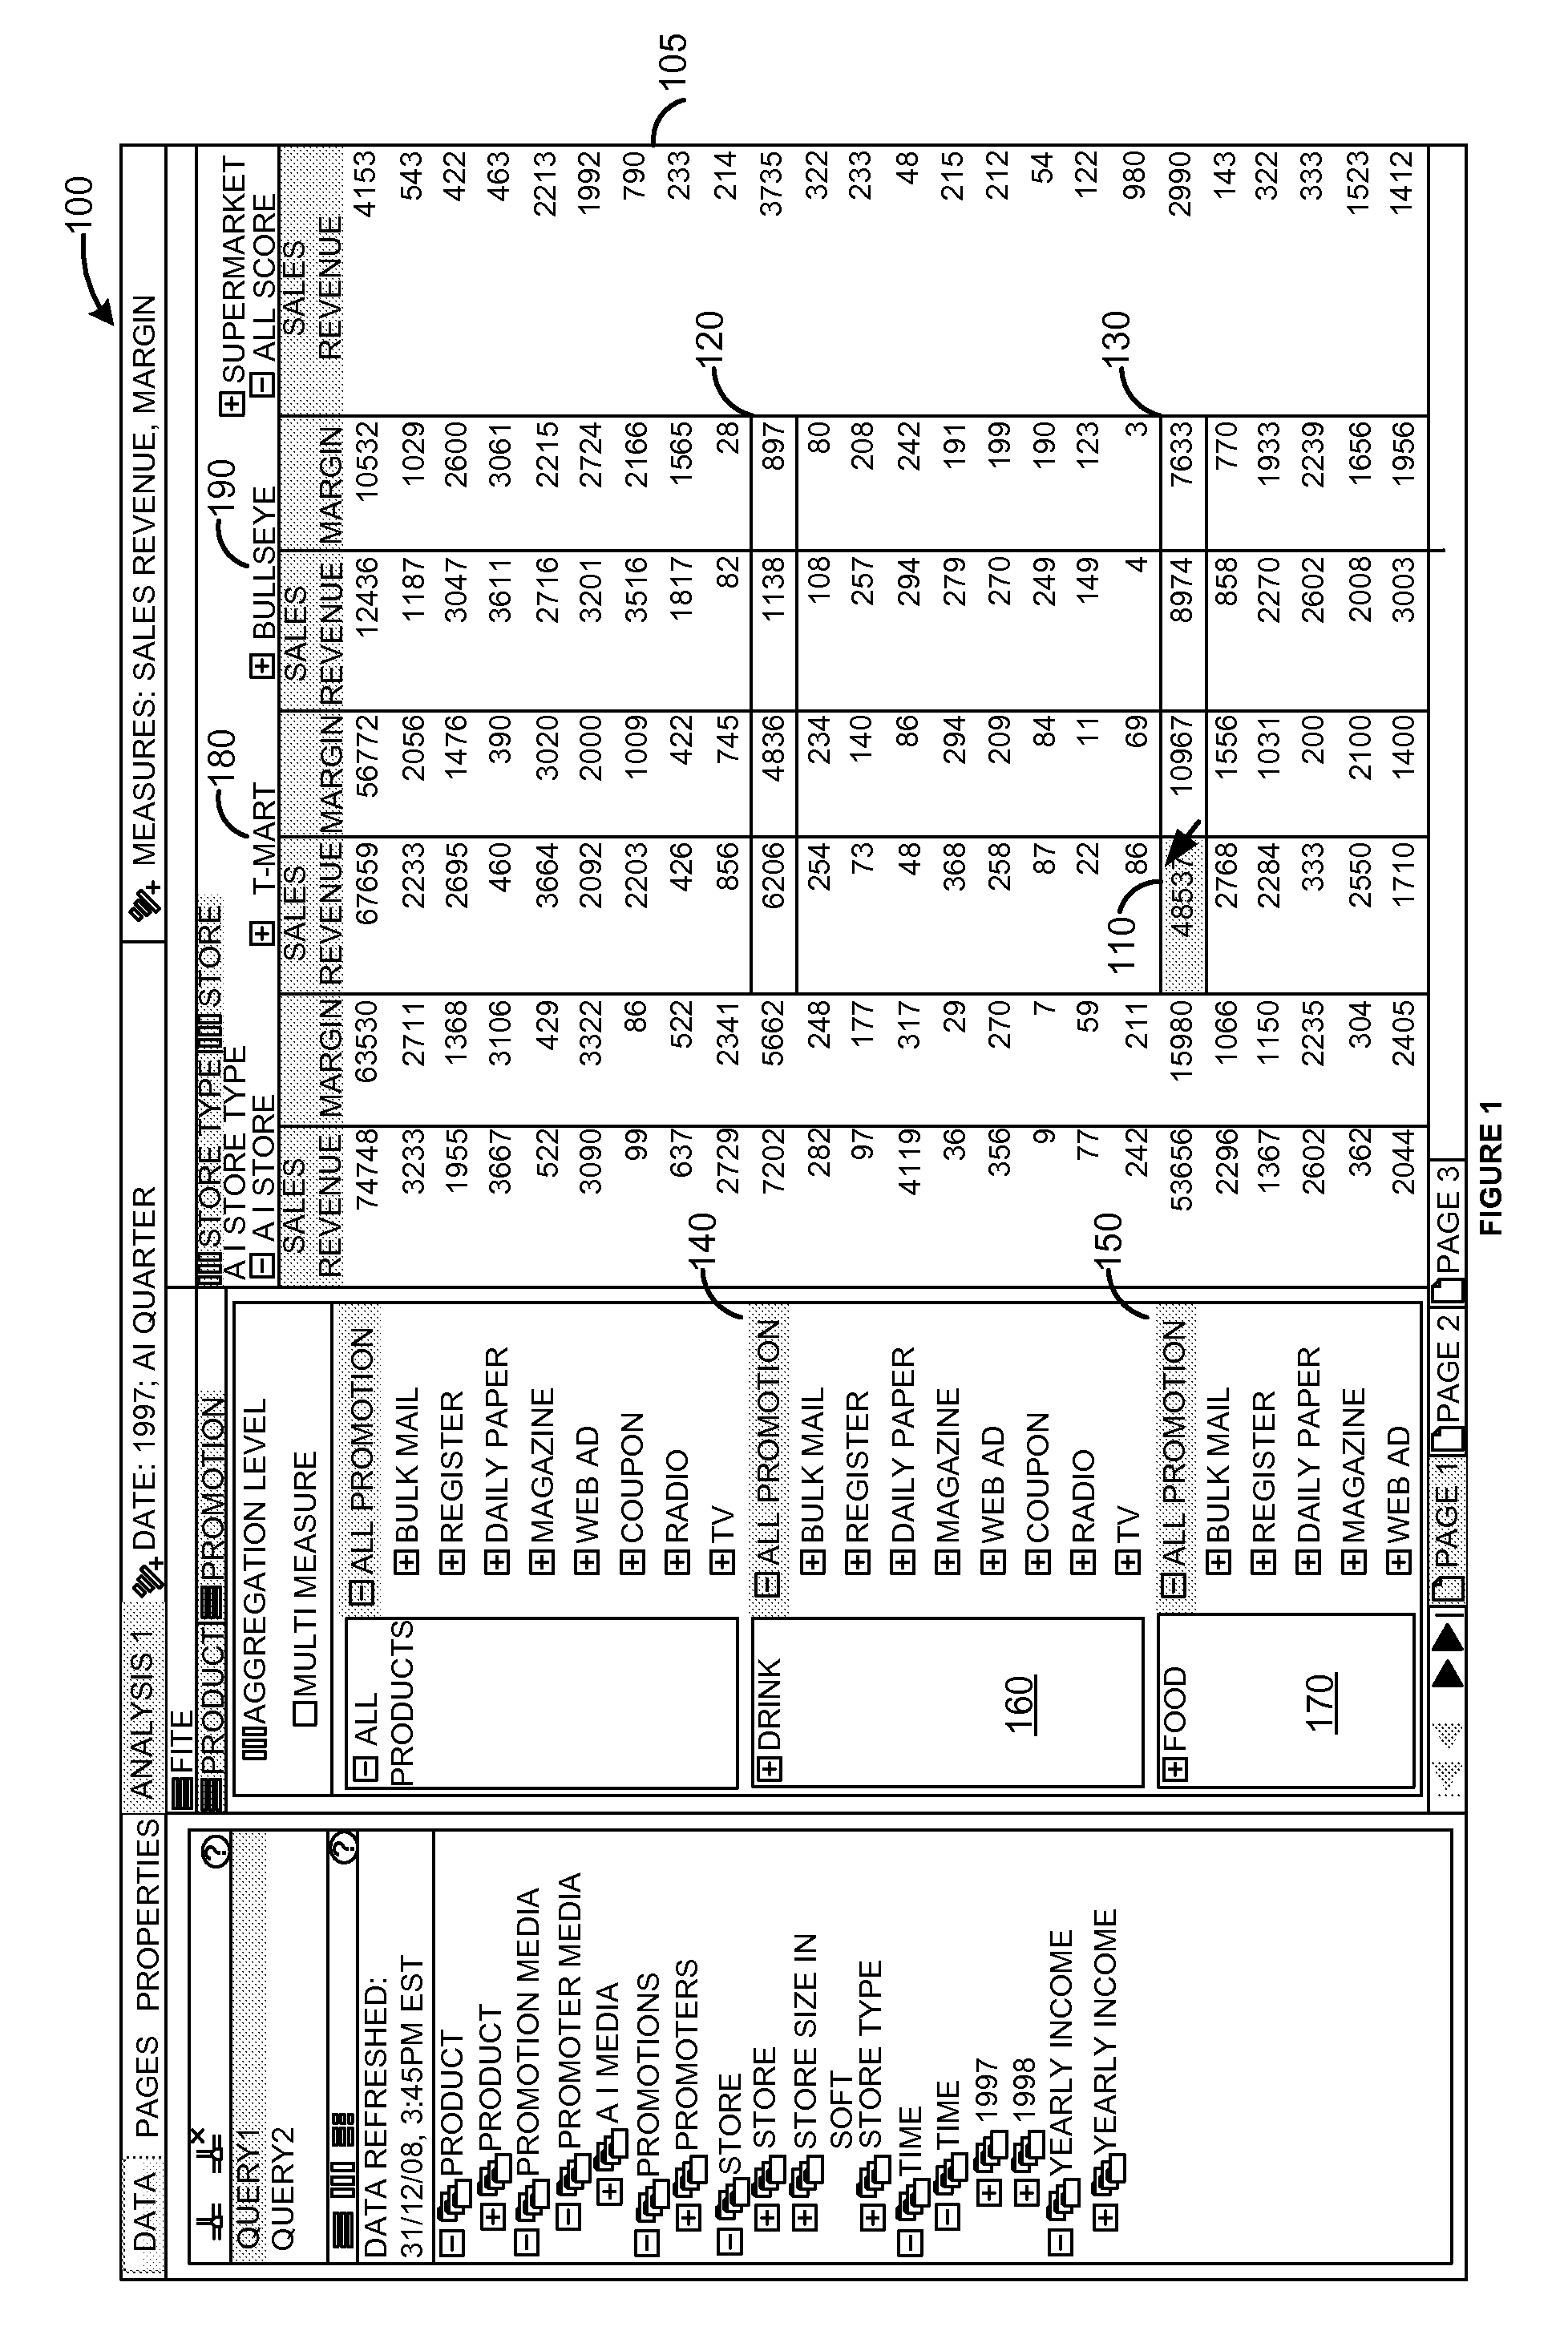 Aggregation level and measure based hinting and selection of cells in a data display